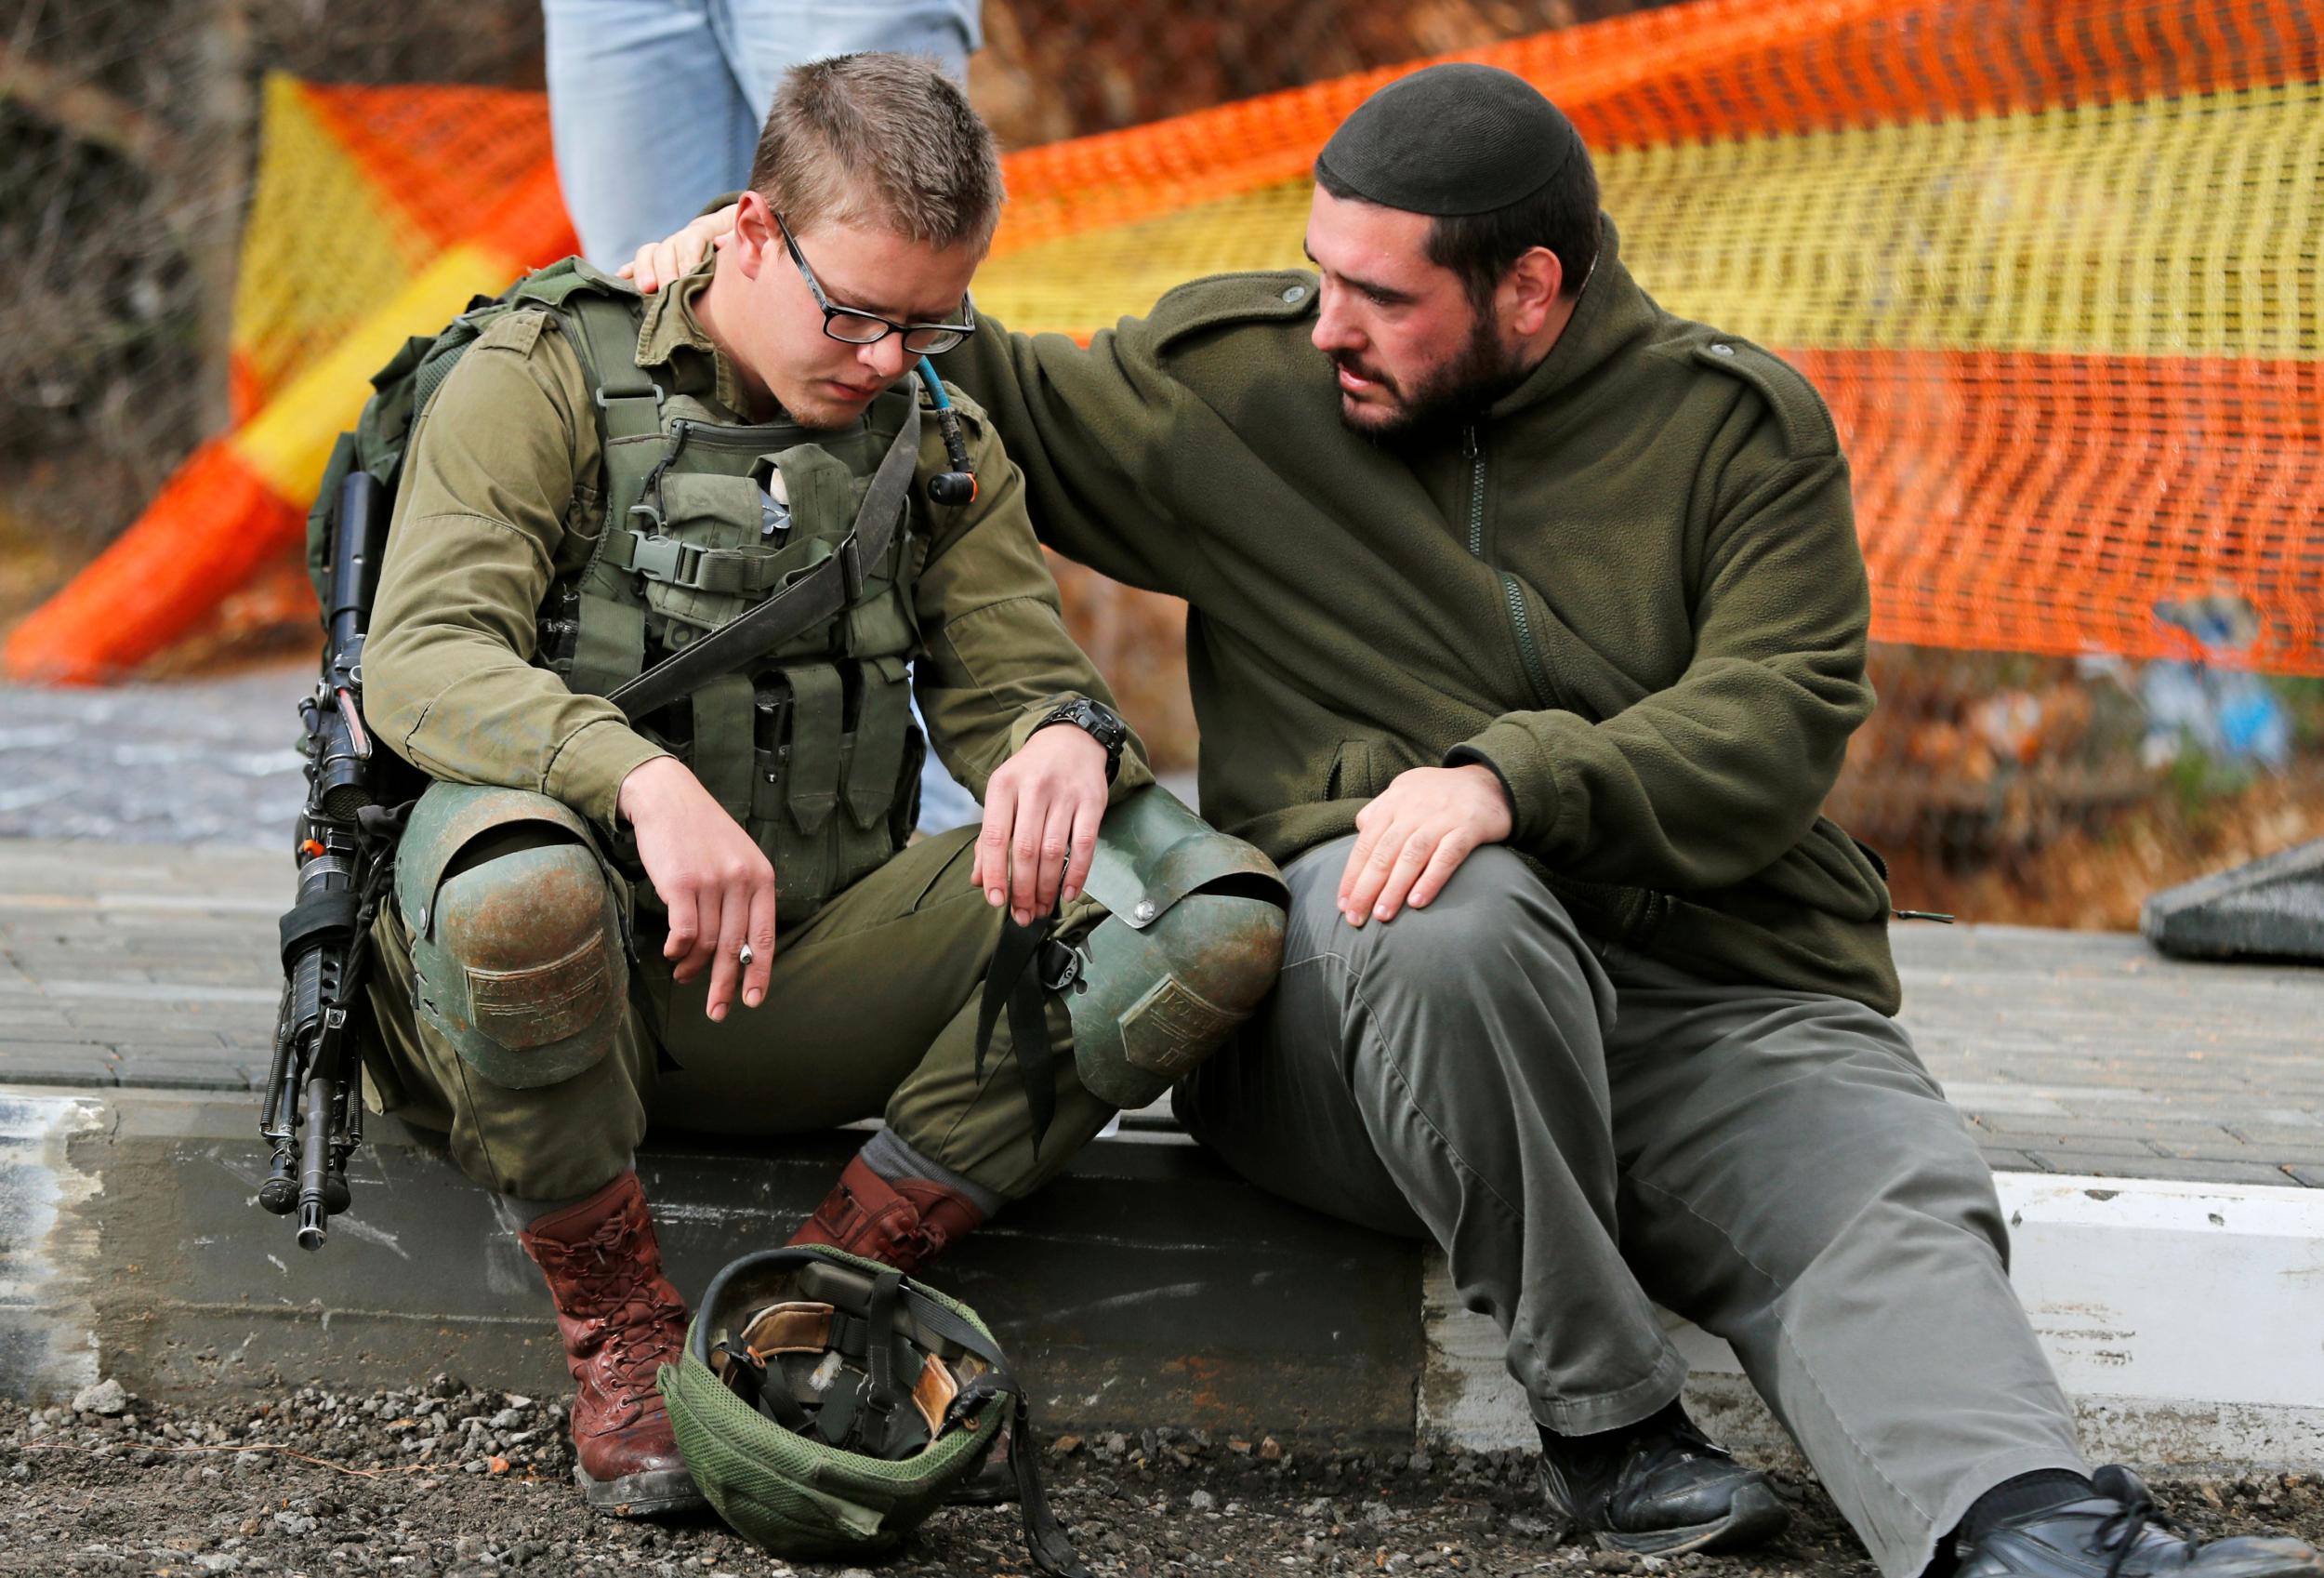 An Isreali soldier is consoled at the site of a Palestinian drive-by shooting attack outside the West Bank settlement of Givat Asaf, northeast of Ramallah ( AHMAD GHARABLI/AFP/Getty Images))